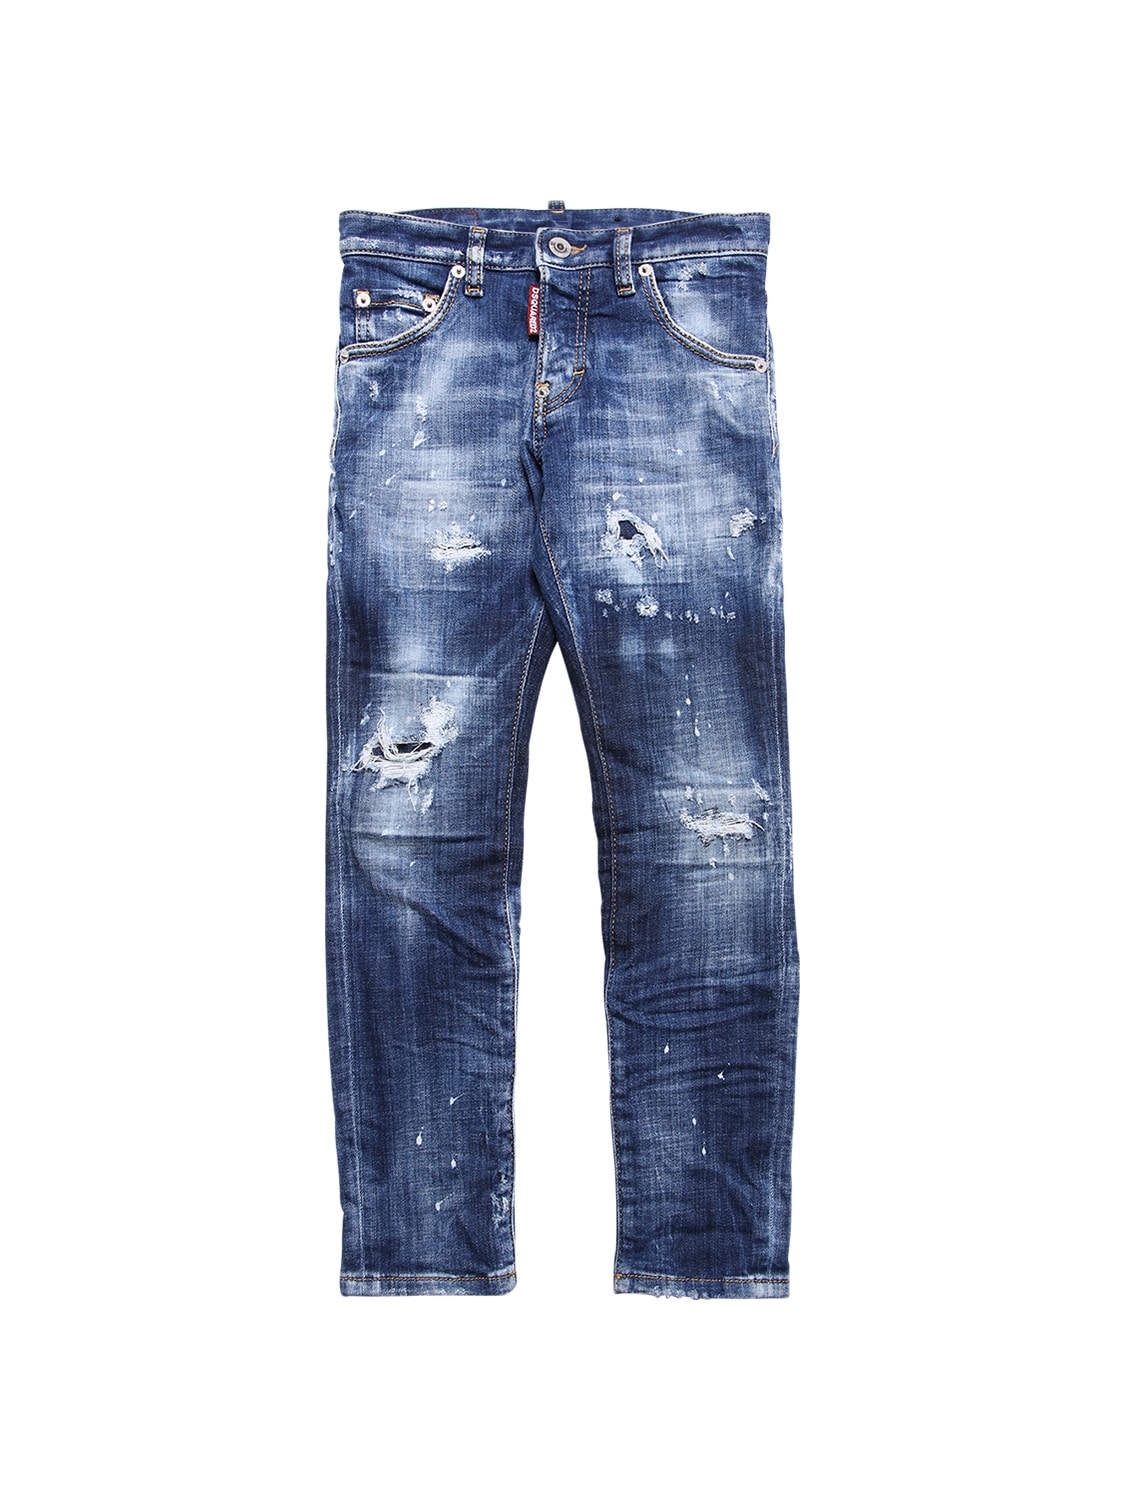 dsquared2 painted jeans